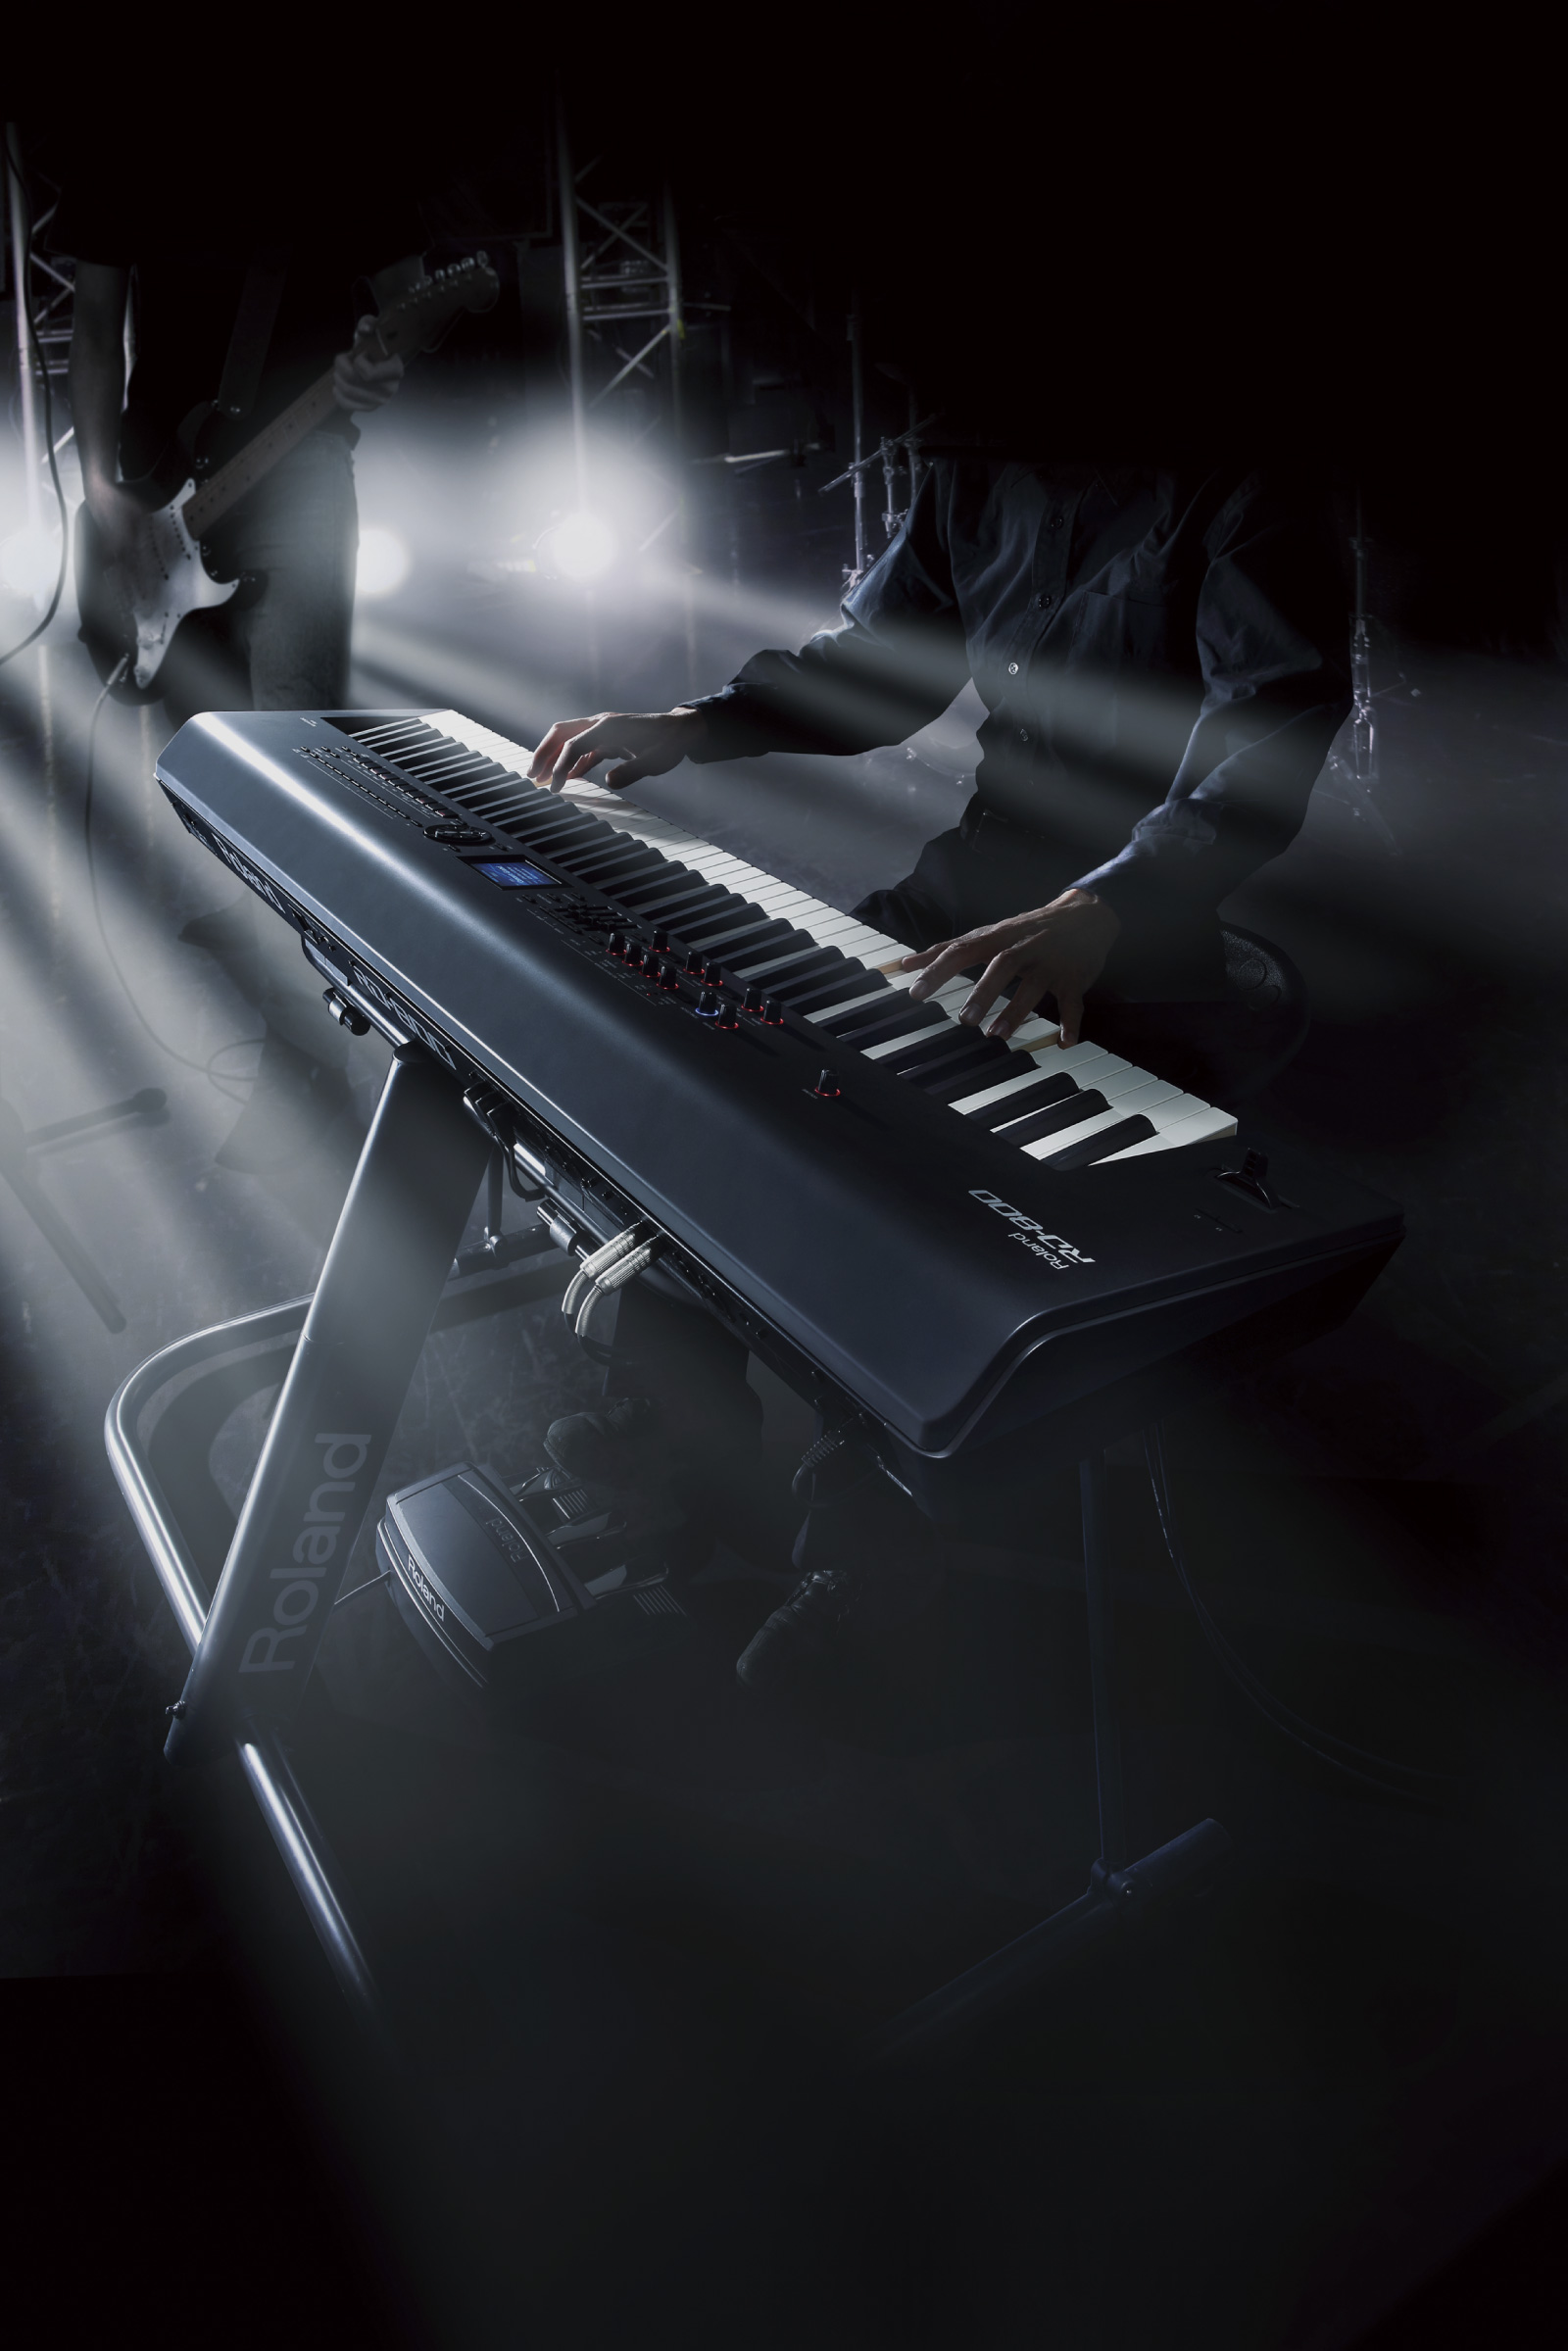 how to connect roland rd800 stage piano to bluetooth